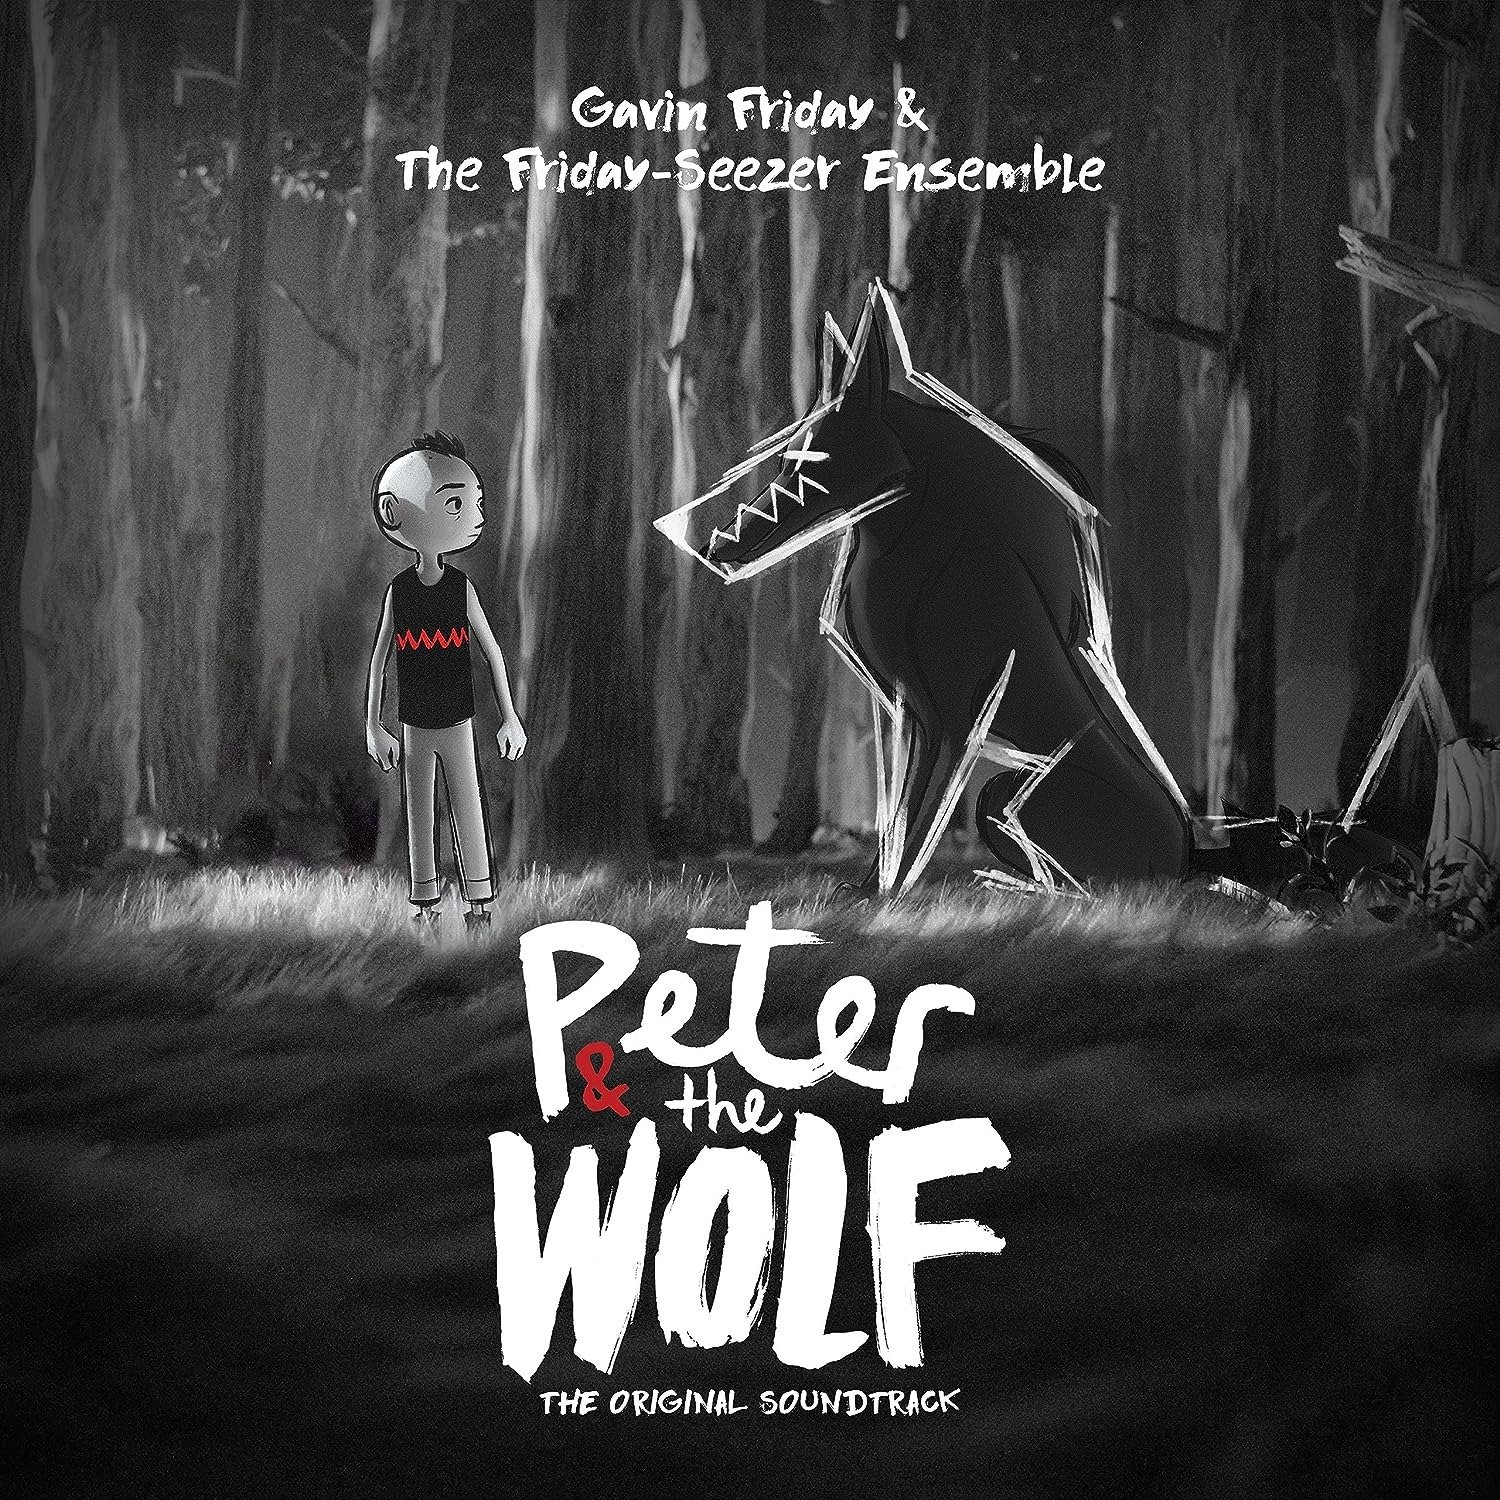 CD Shop - FRIDAY, GAVIN  & THE FRIDAY-SEEZER ENSEMBLE PETER AND THE WOLF (ORIGINAL SOUNDTRACK)